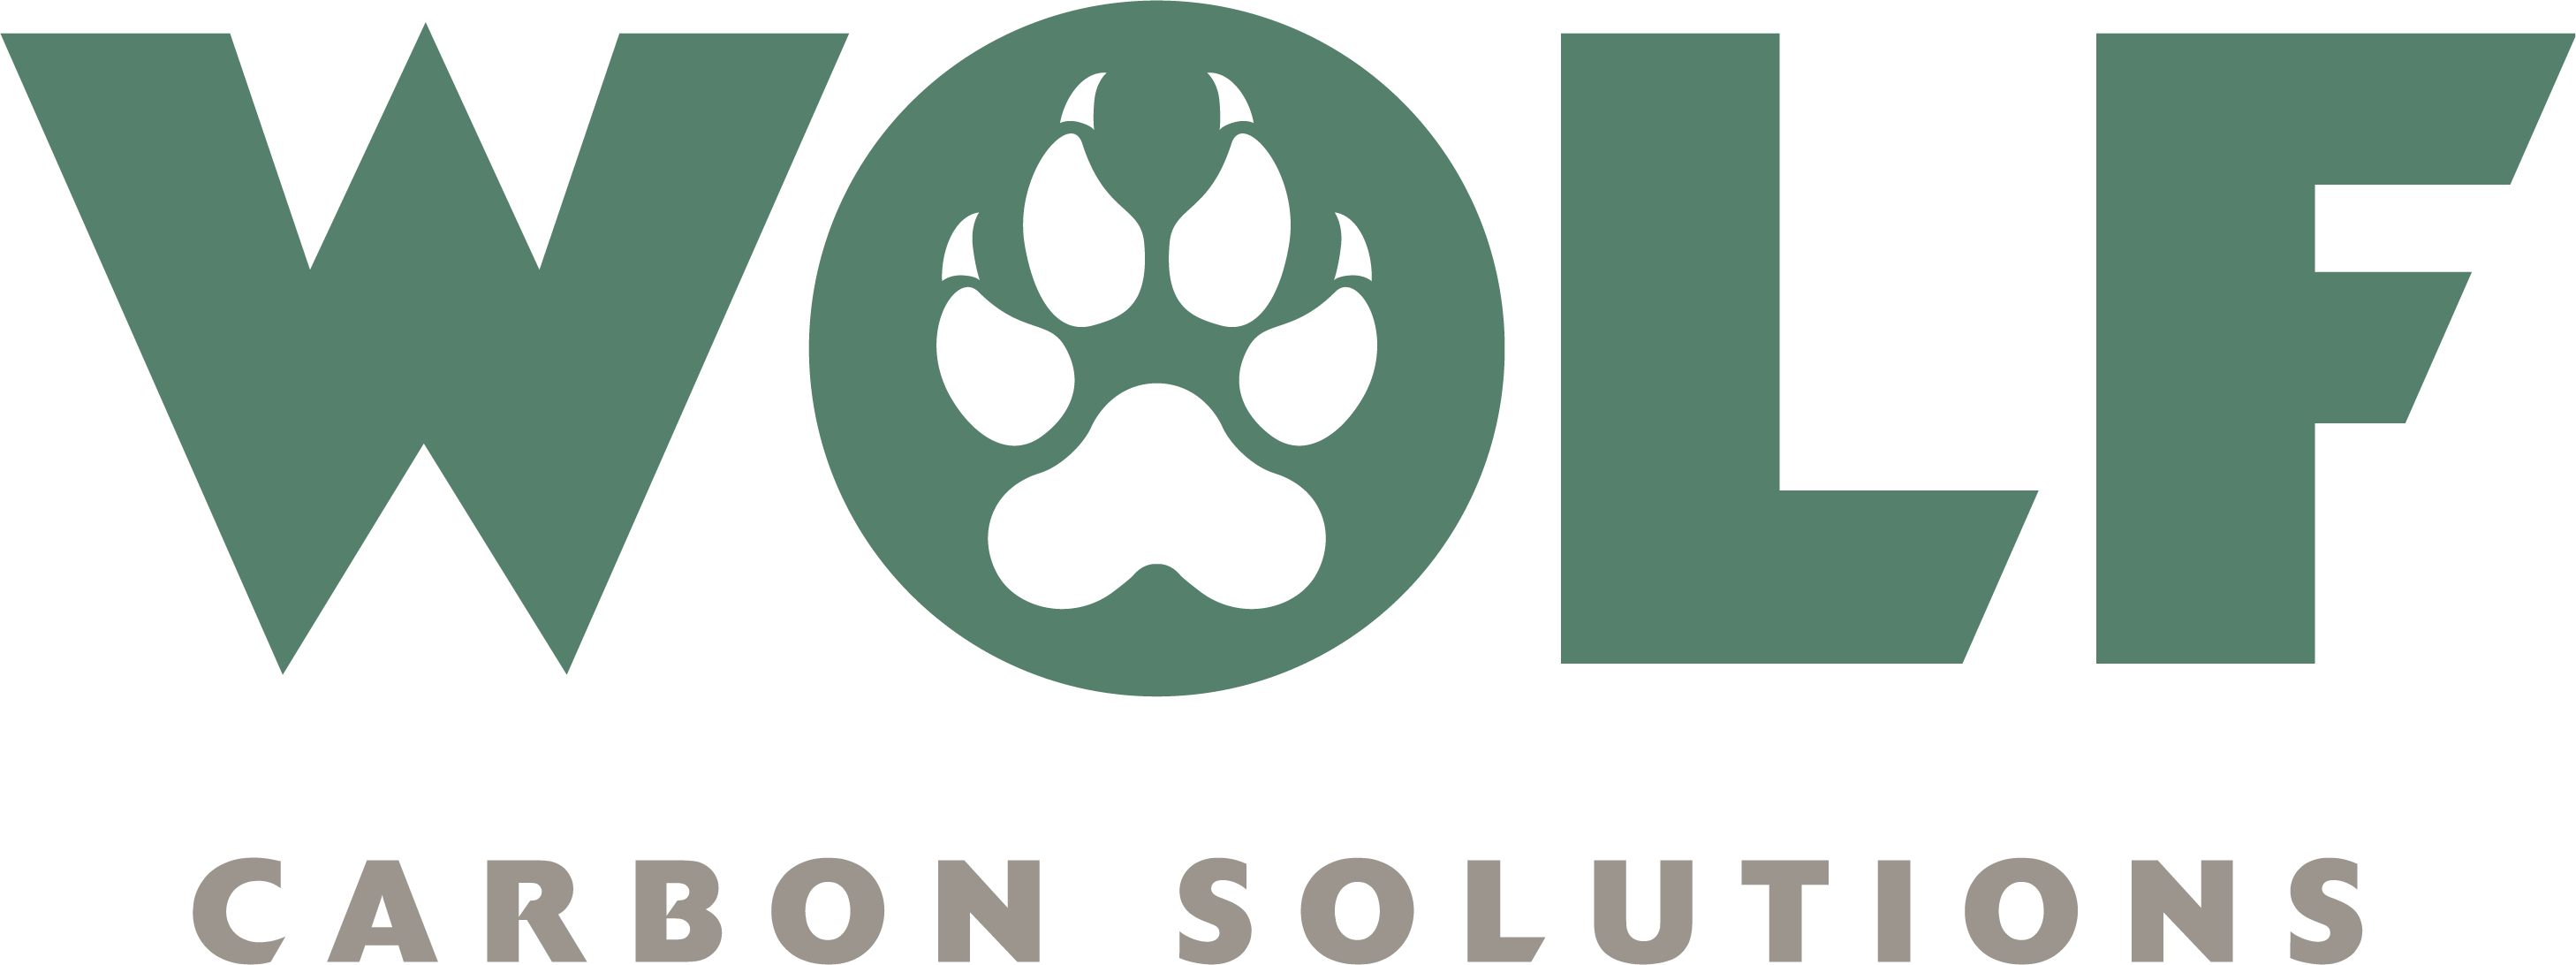 Wolf Carbon Solutions Logo